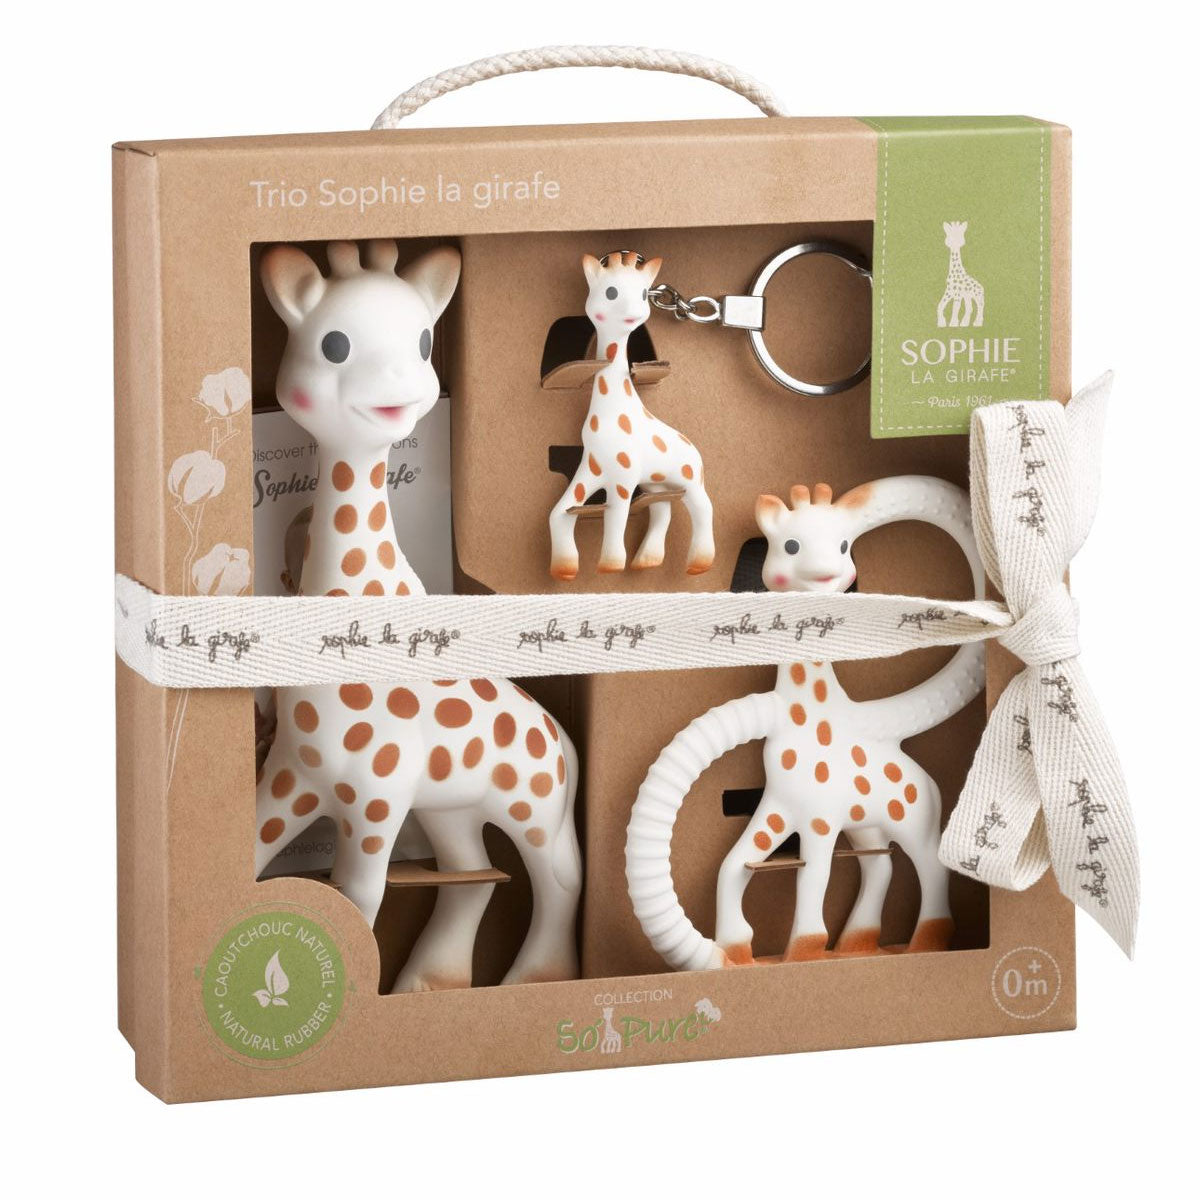 Original Sophie La Girafe, Sophie Keyring and Sophie teething Ring all presented in a gift box. 